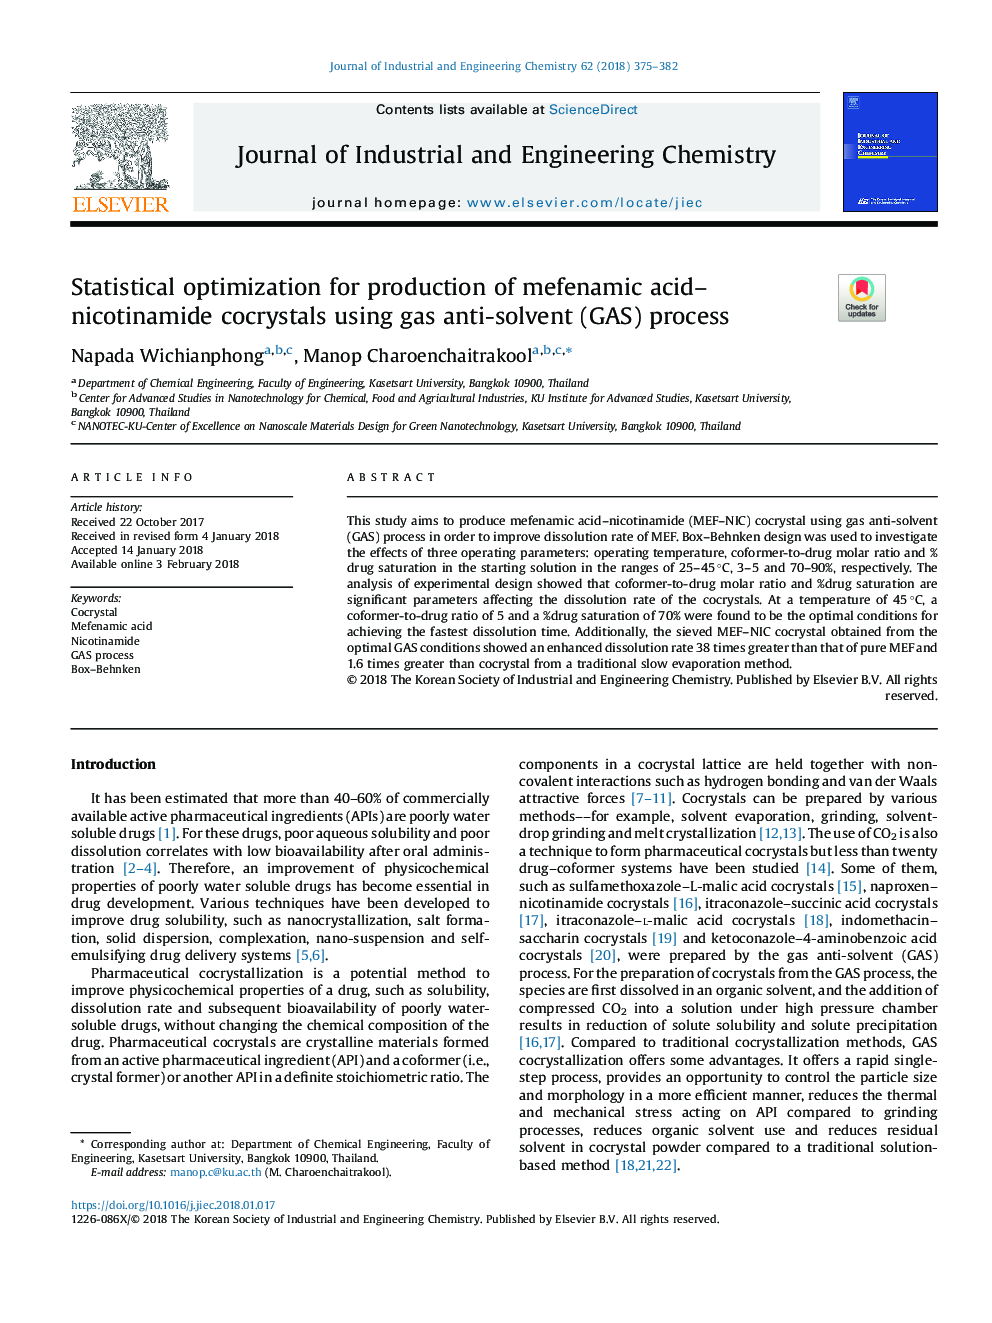 Statistical optimization for production of mefenamic acid-nicotinamide cocrystals using gas anti-solvent (GAS) process